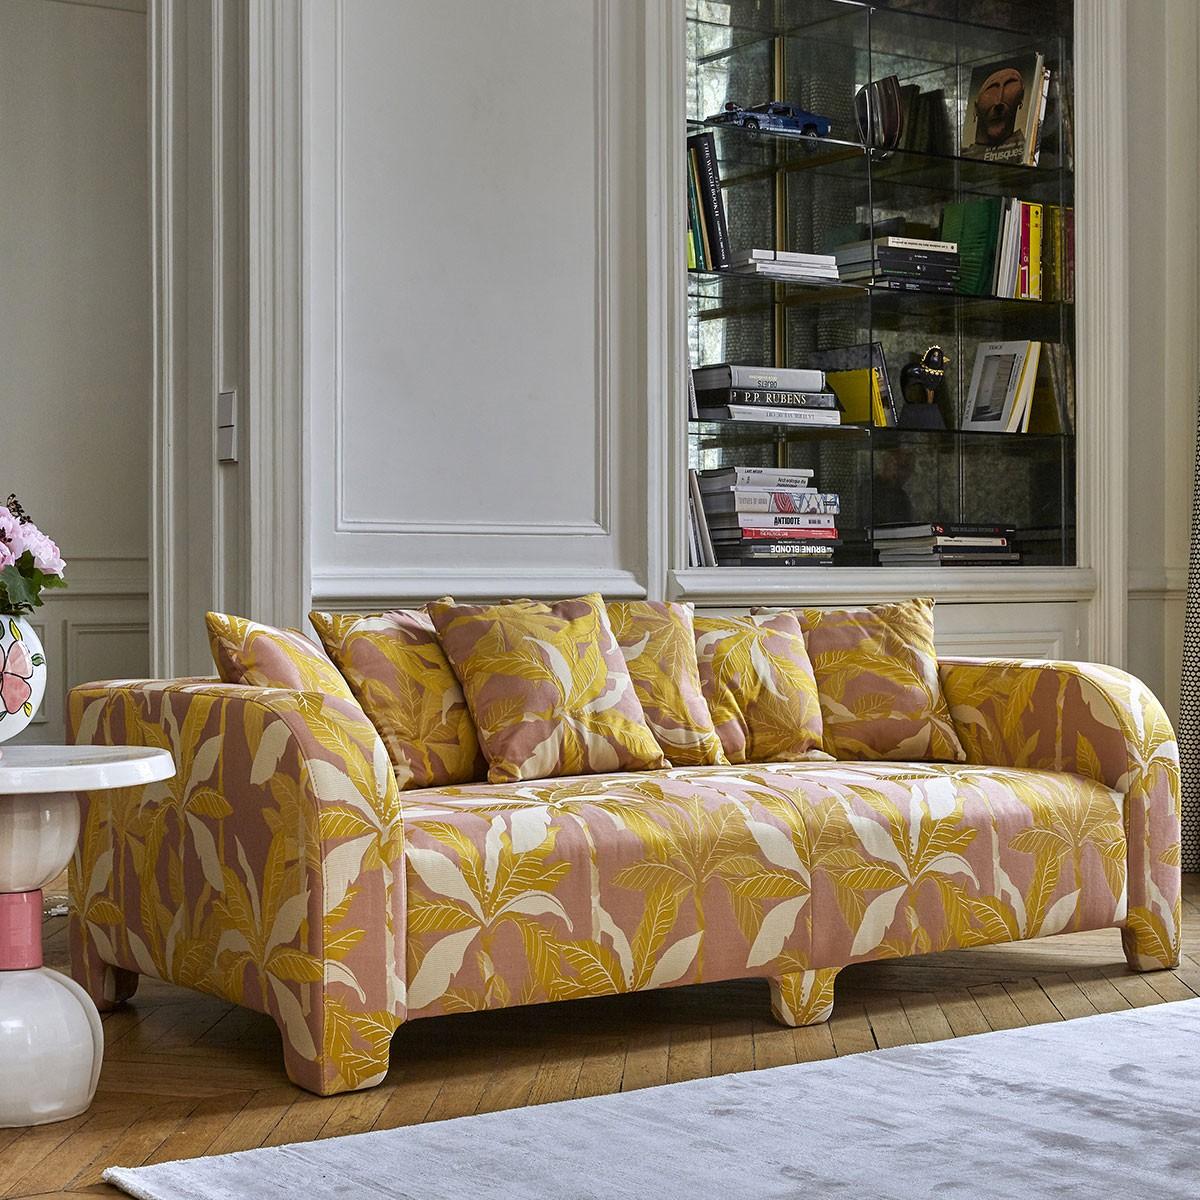 Popus Editions Graziella 4 seater sofa in yellow Verone velvet upholstery

A foot that hides another. A cushion that hides another. A curve that hides another with contemporary lines and a base like a punctuation mark, this sofa gives pride of